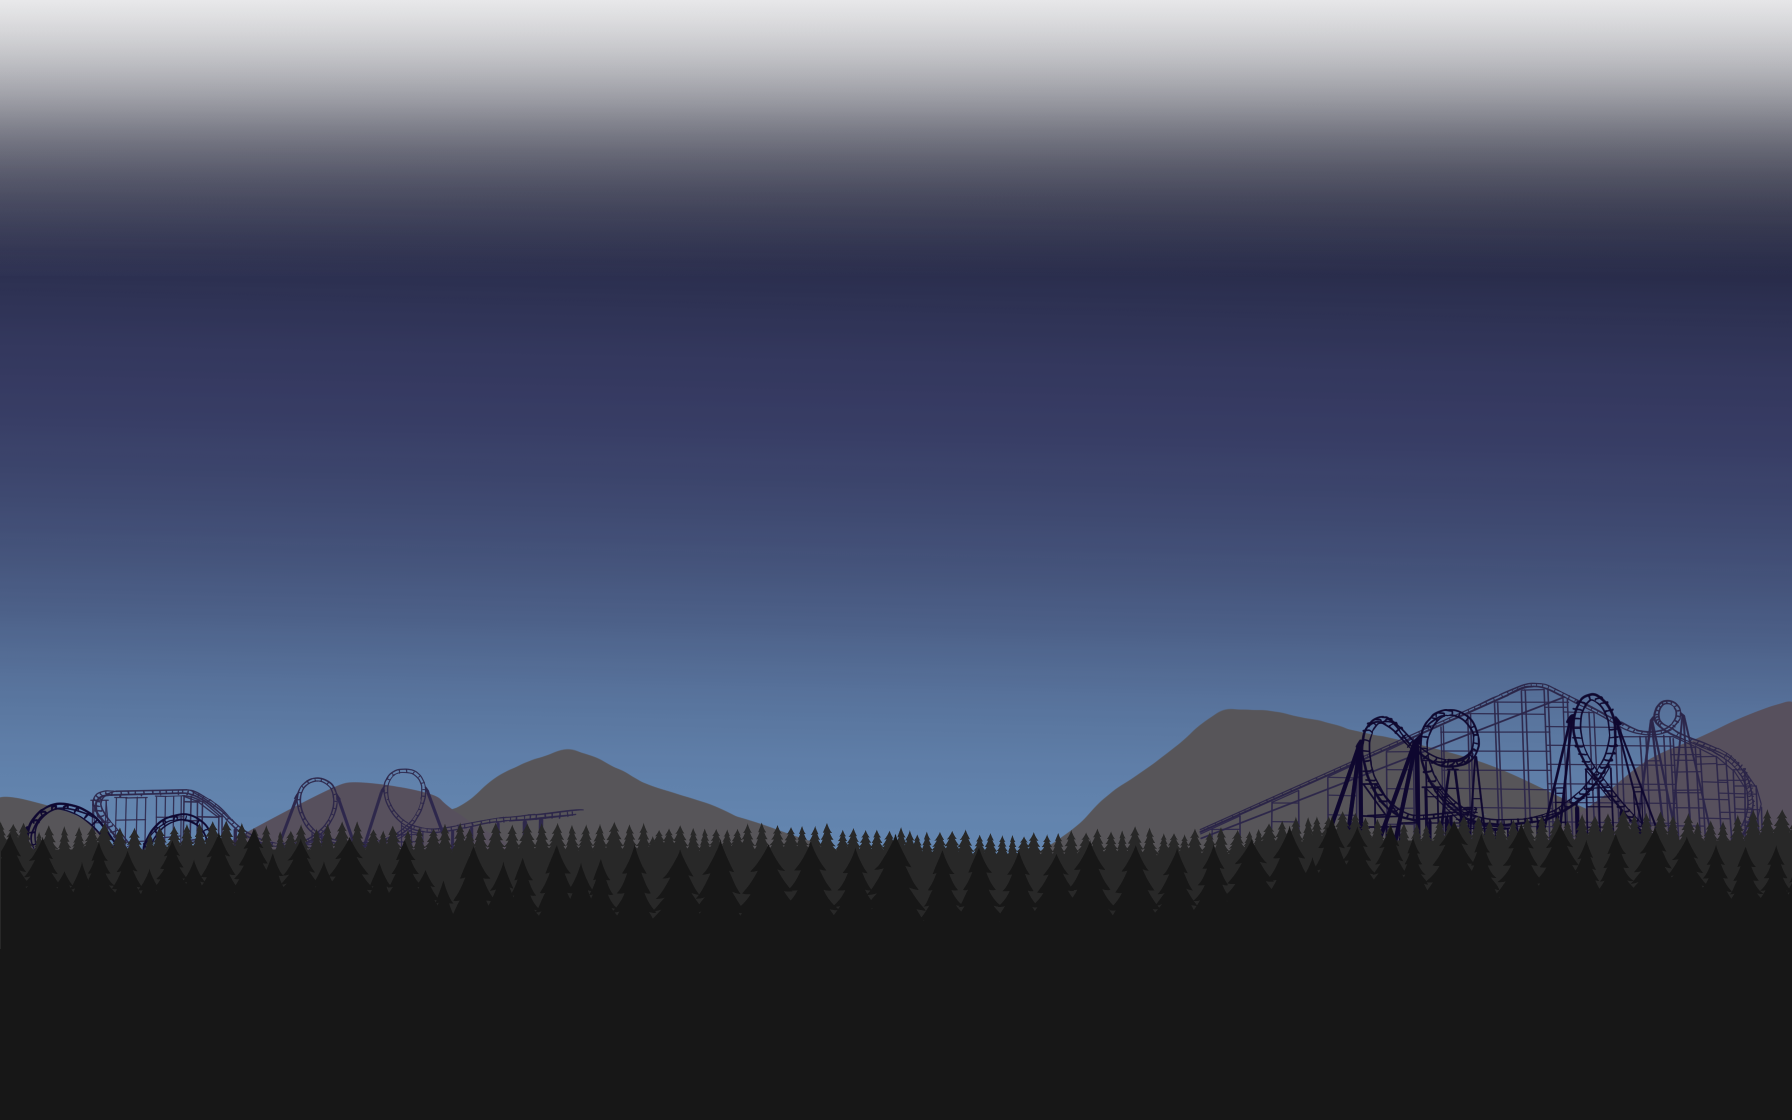 Mysterious looping roller coaster deep in the forest, mountainous background with night sky.